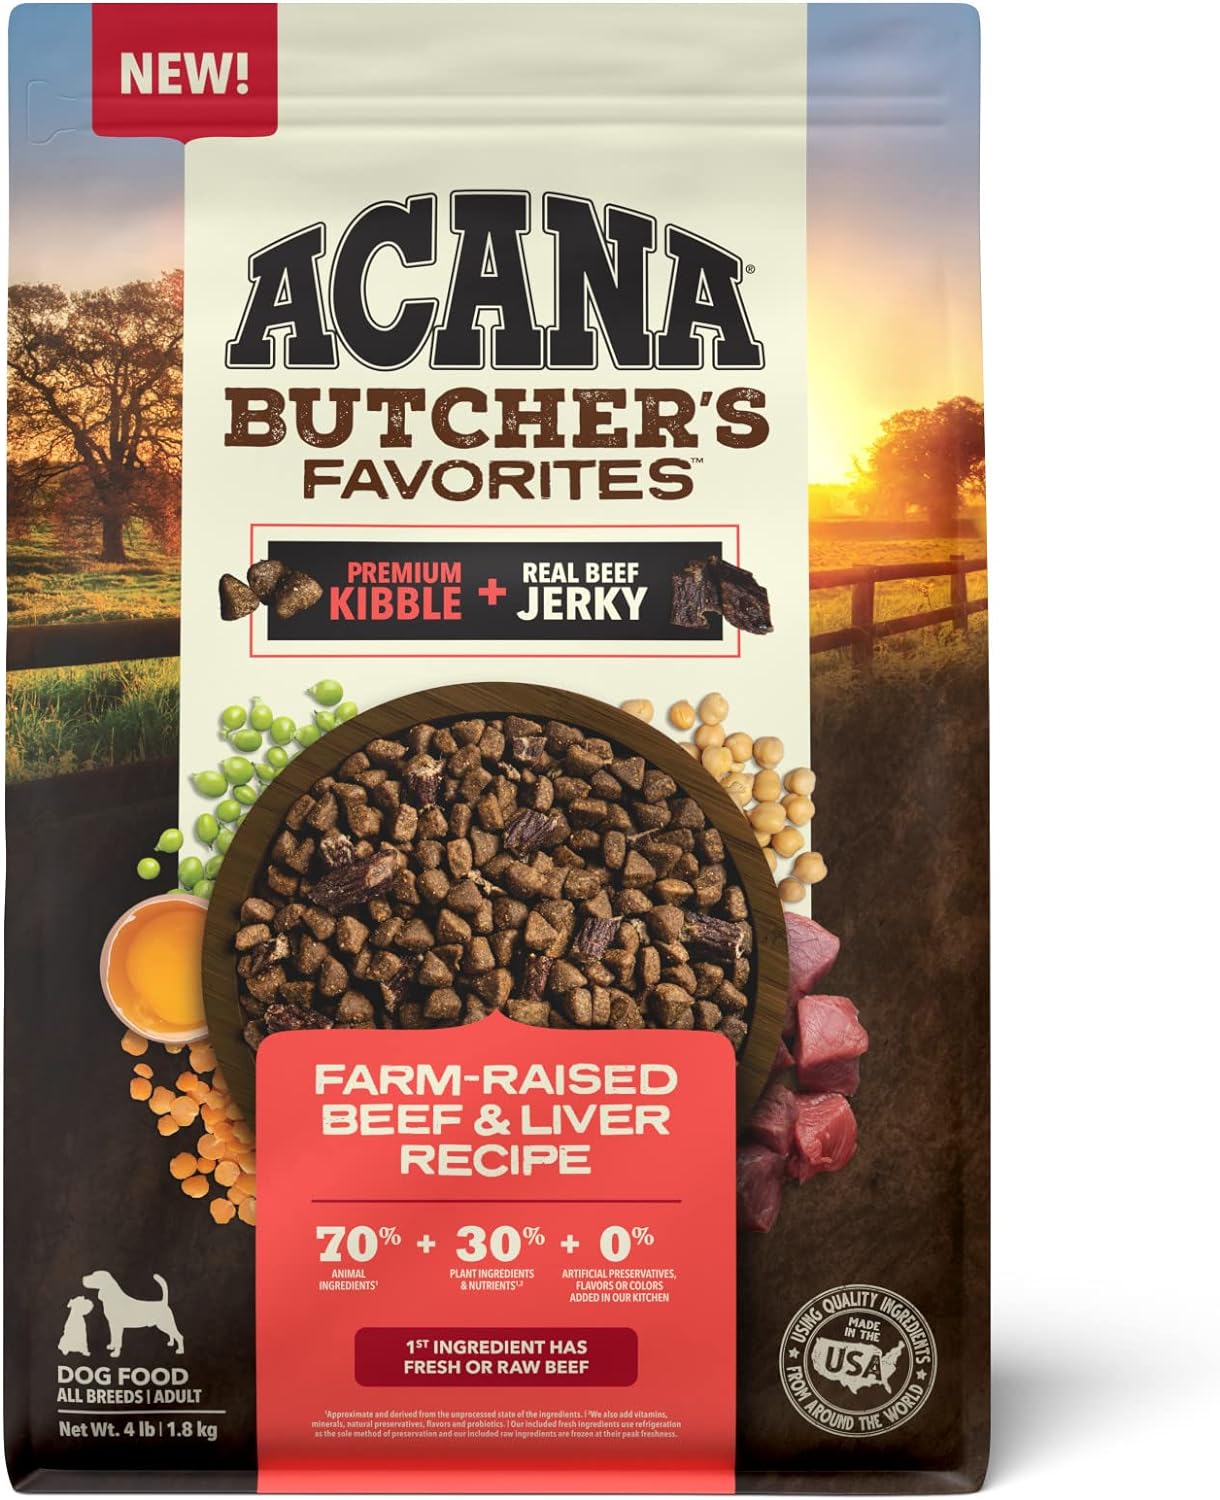 ACANA Butcher's Favorites Dry Dog Food, Farm-Raised Beef & Liver Recipe, Dry Kibble and Beef Jerky Pieces, 4lb